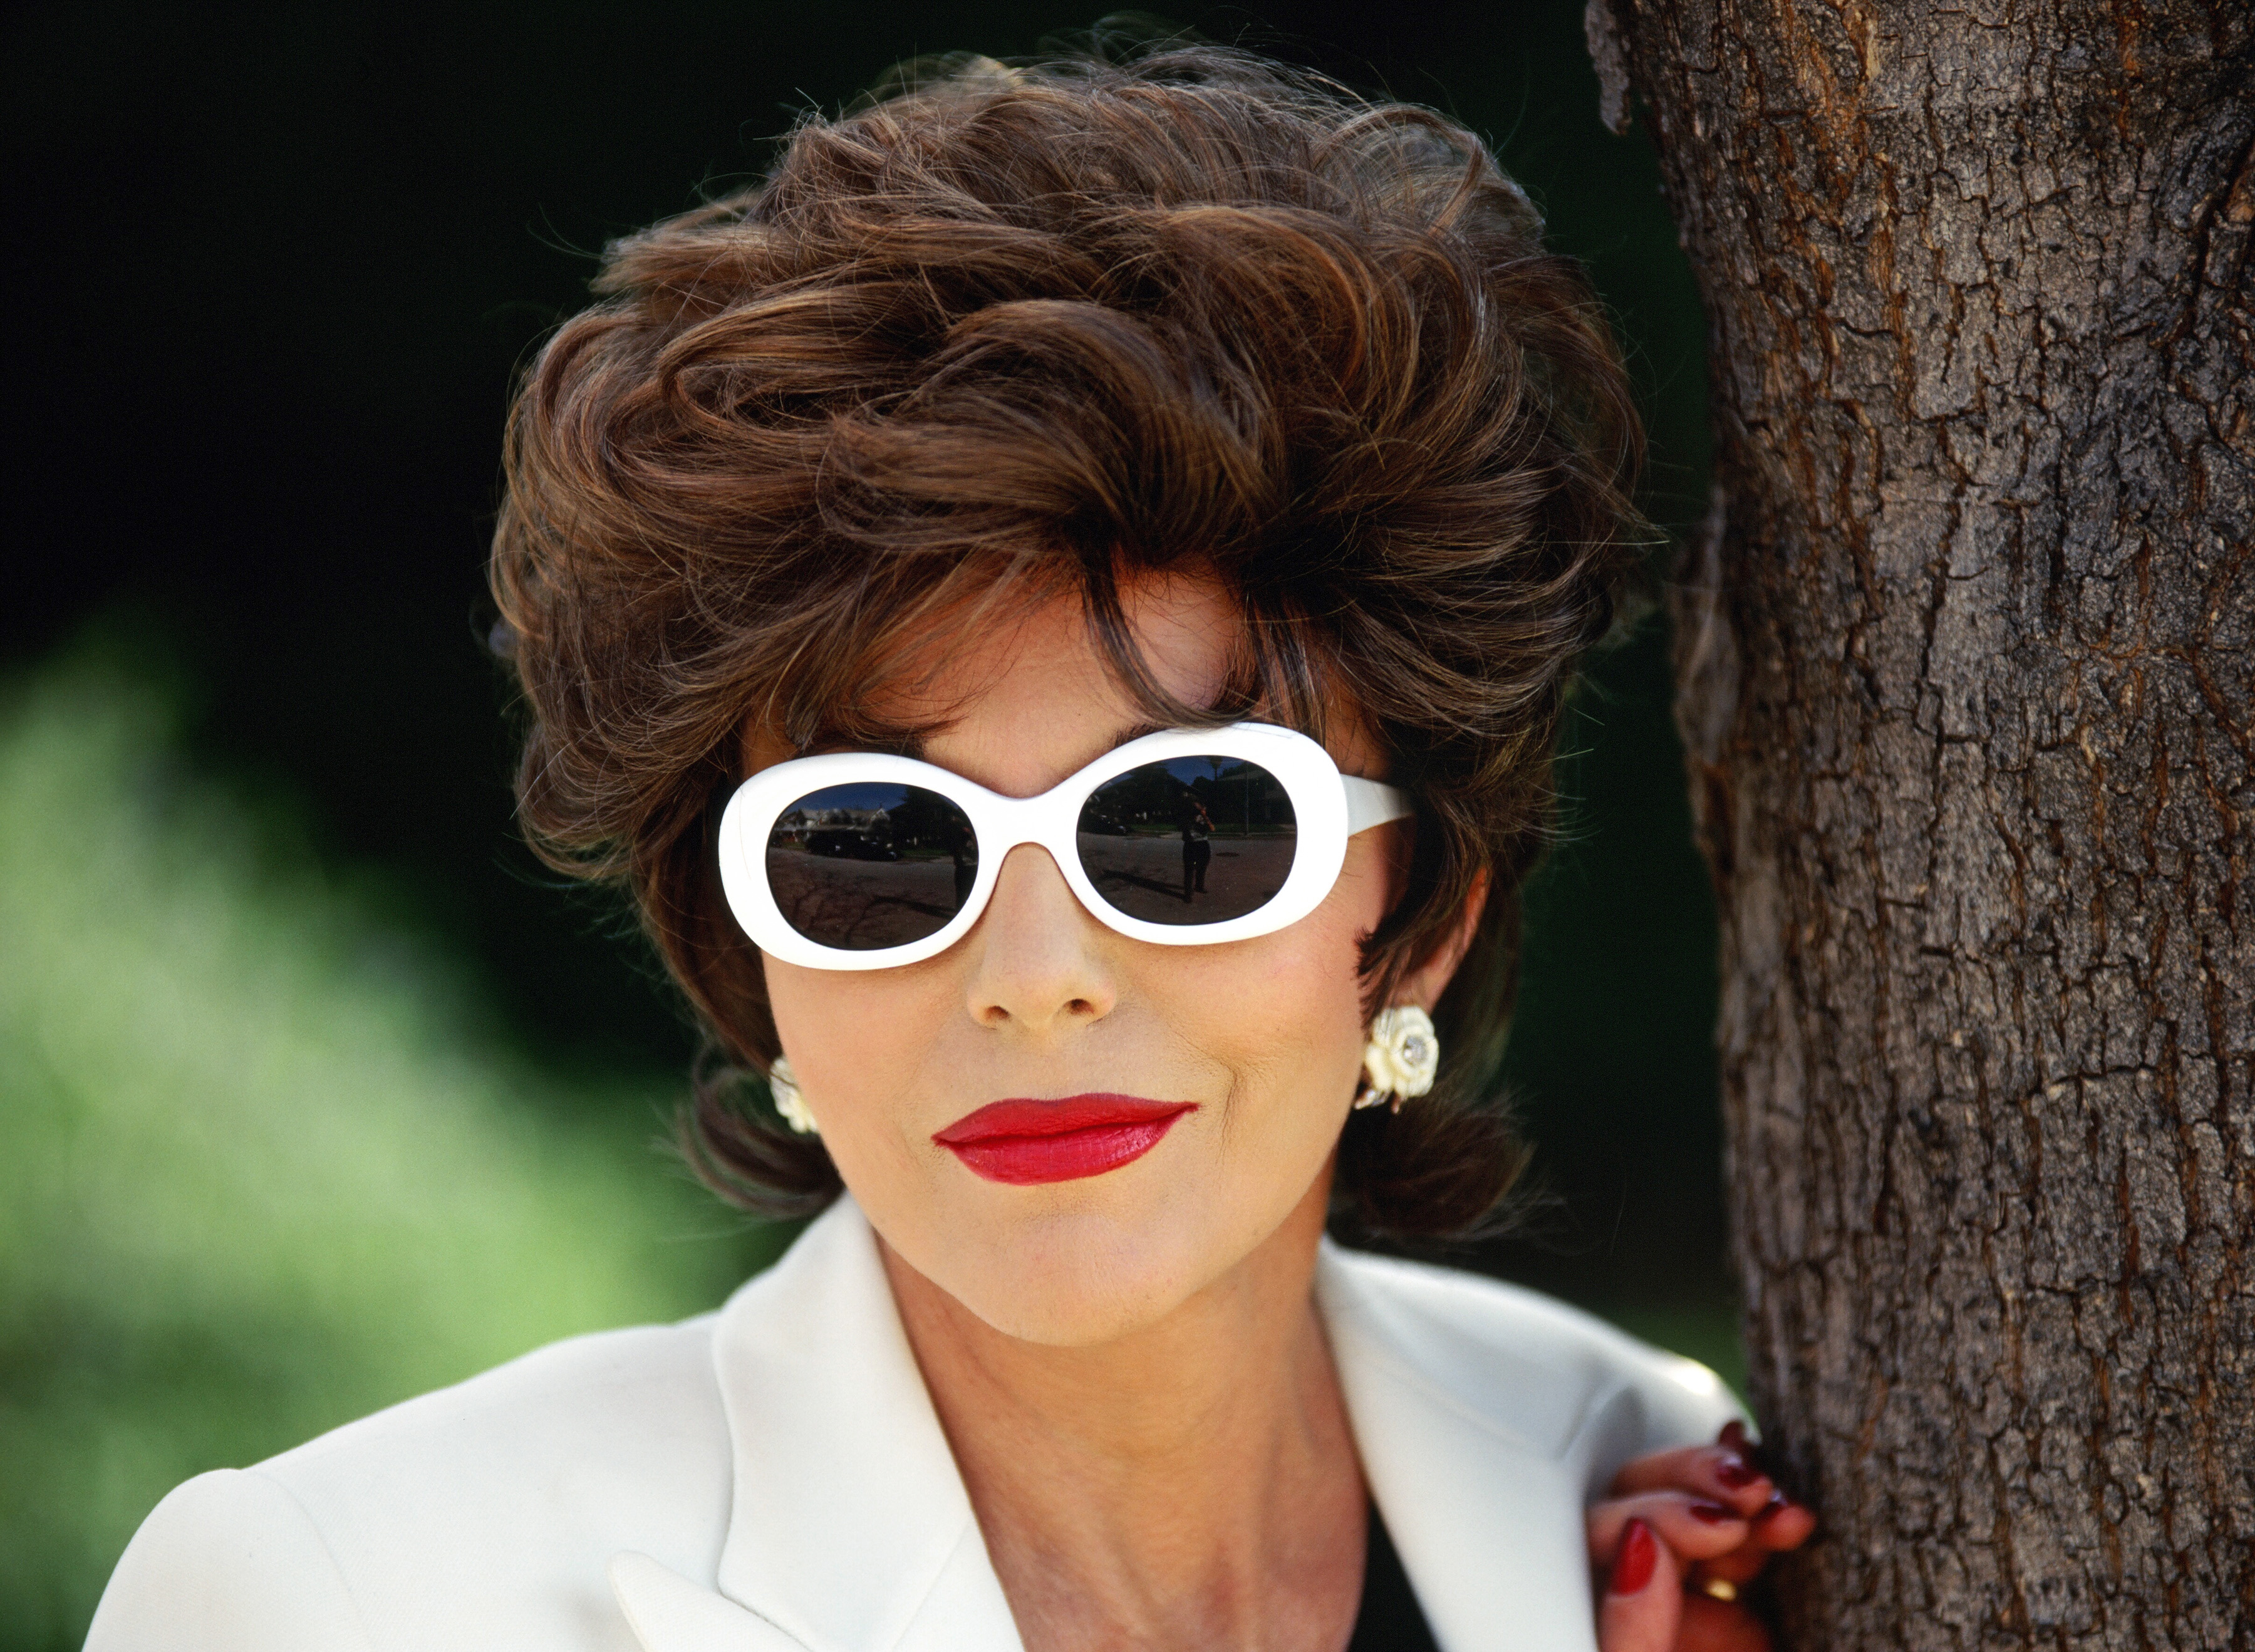 Joan Collins while filming a Minolta camera commercial in Los Angeles, California in 2001. | Source: Getty Images